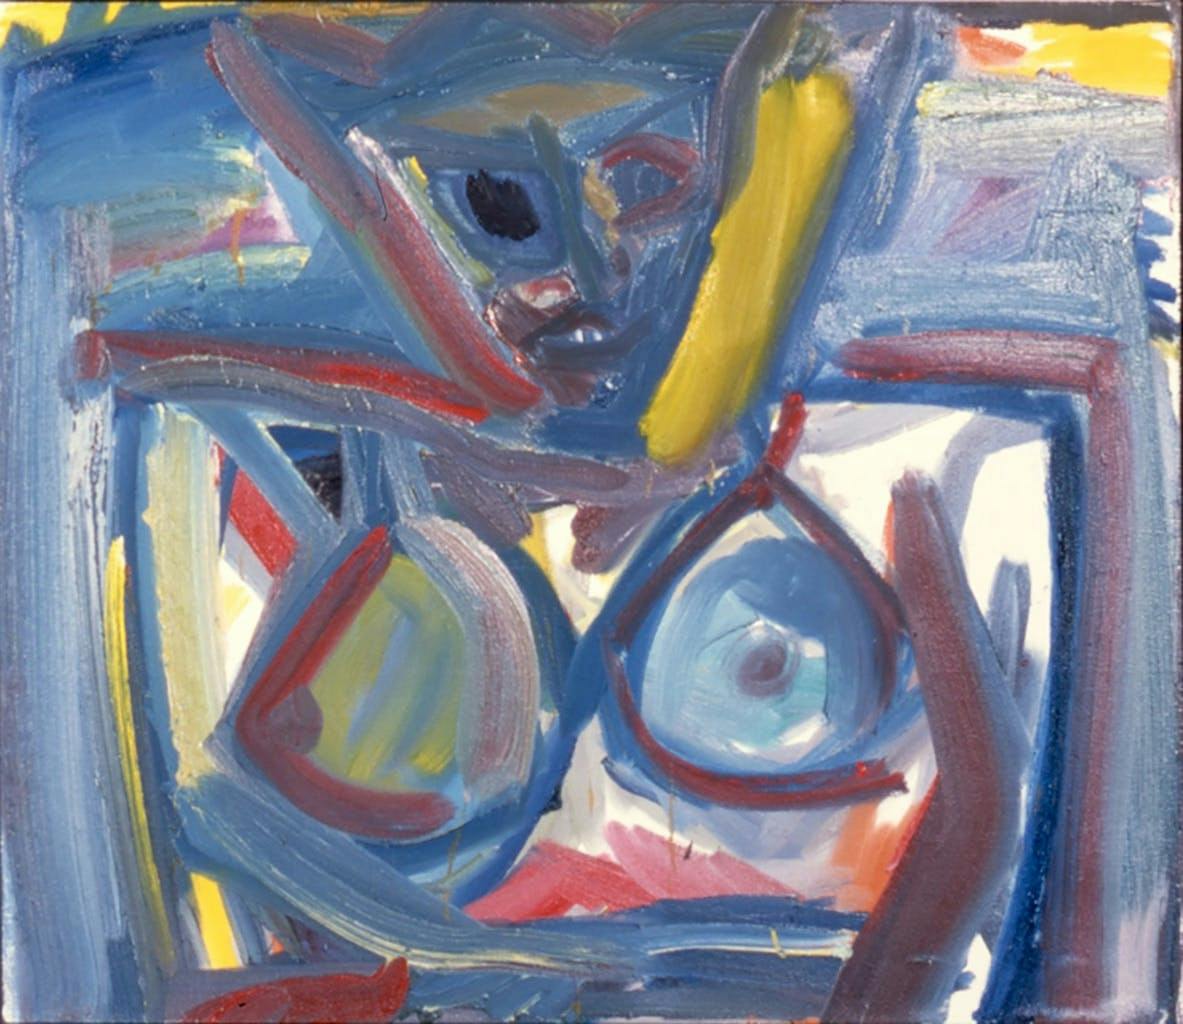 (Dedicated to Edvins Strautmanis "He loved de Kooning's paintings and developed his style."), oil and acrylic on canvas